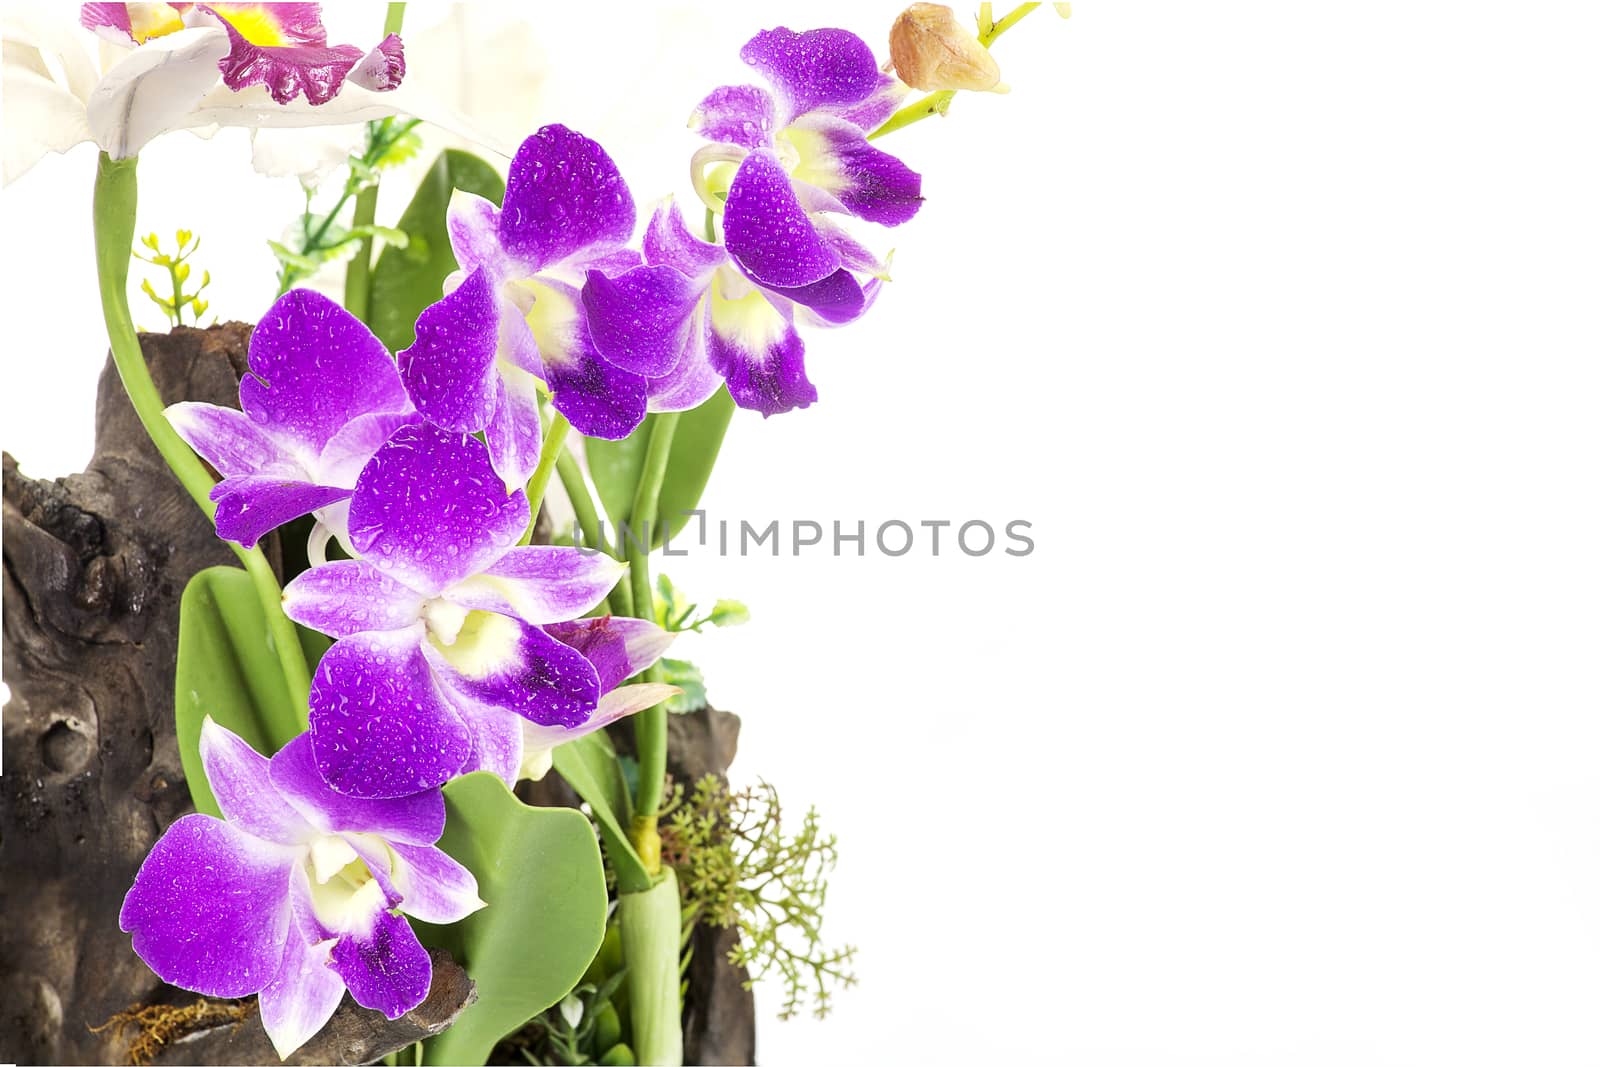 Purple Orchid on an old tree stump isolate on white background.